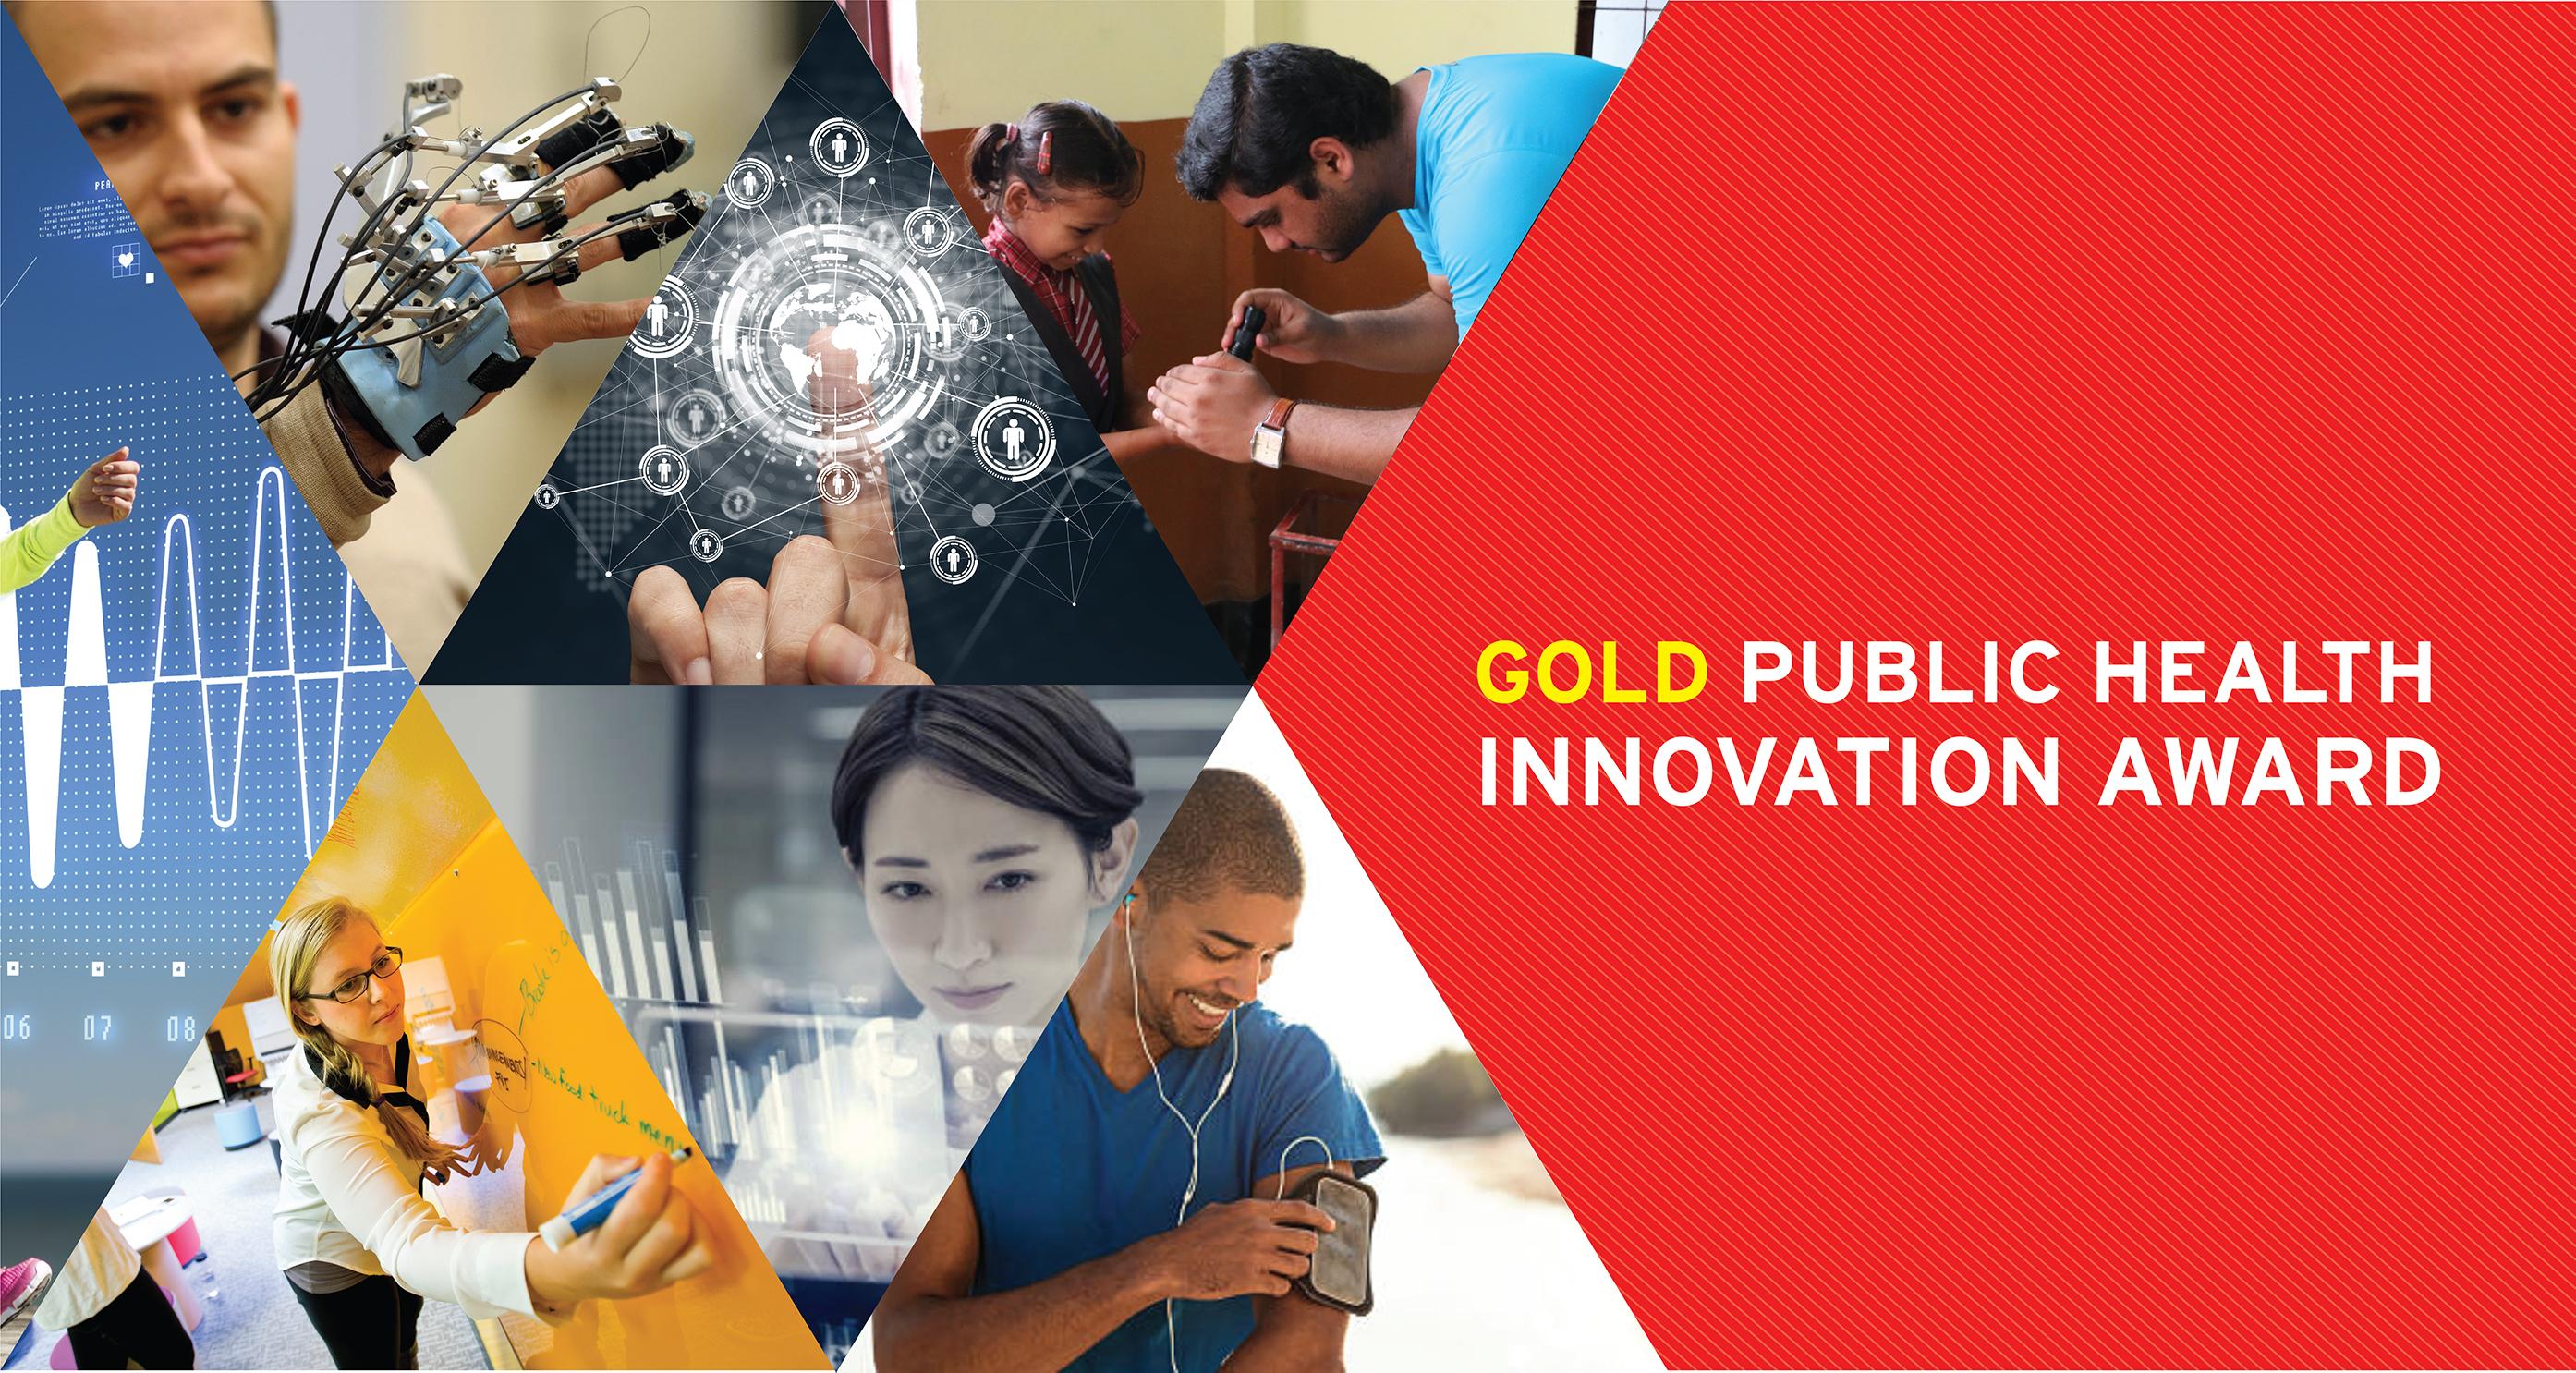 Gold Public Health Innovation Award from the School of Public Health at the University of Maryland